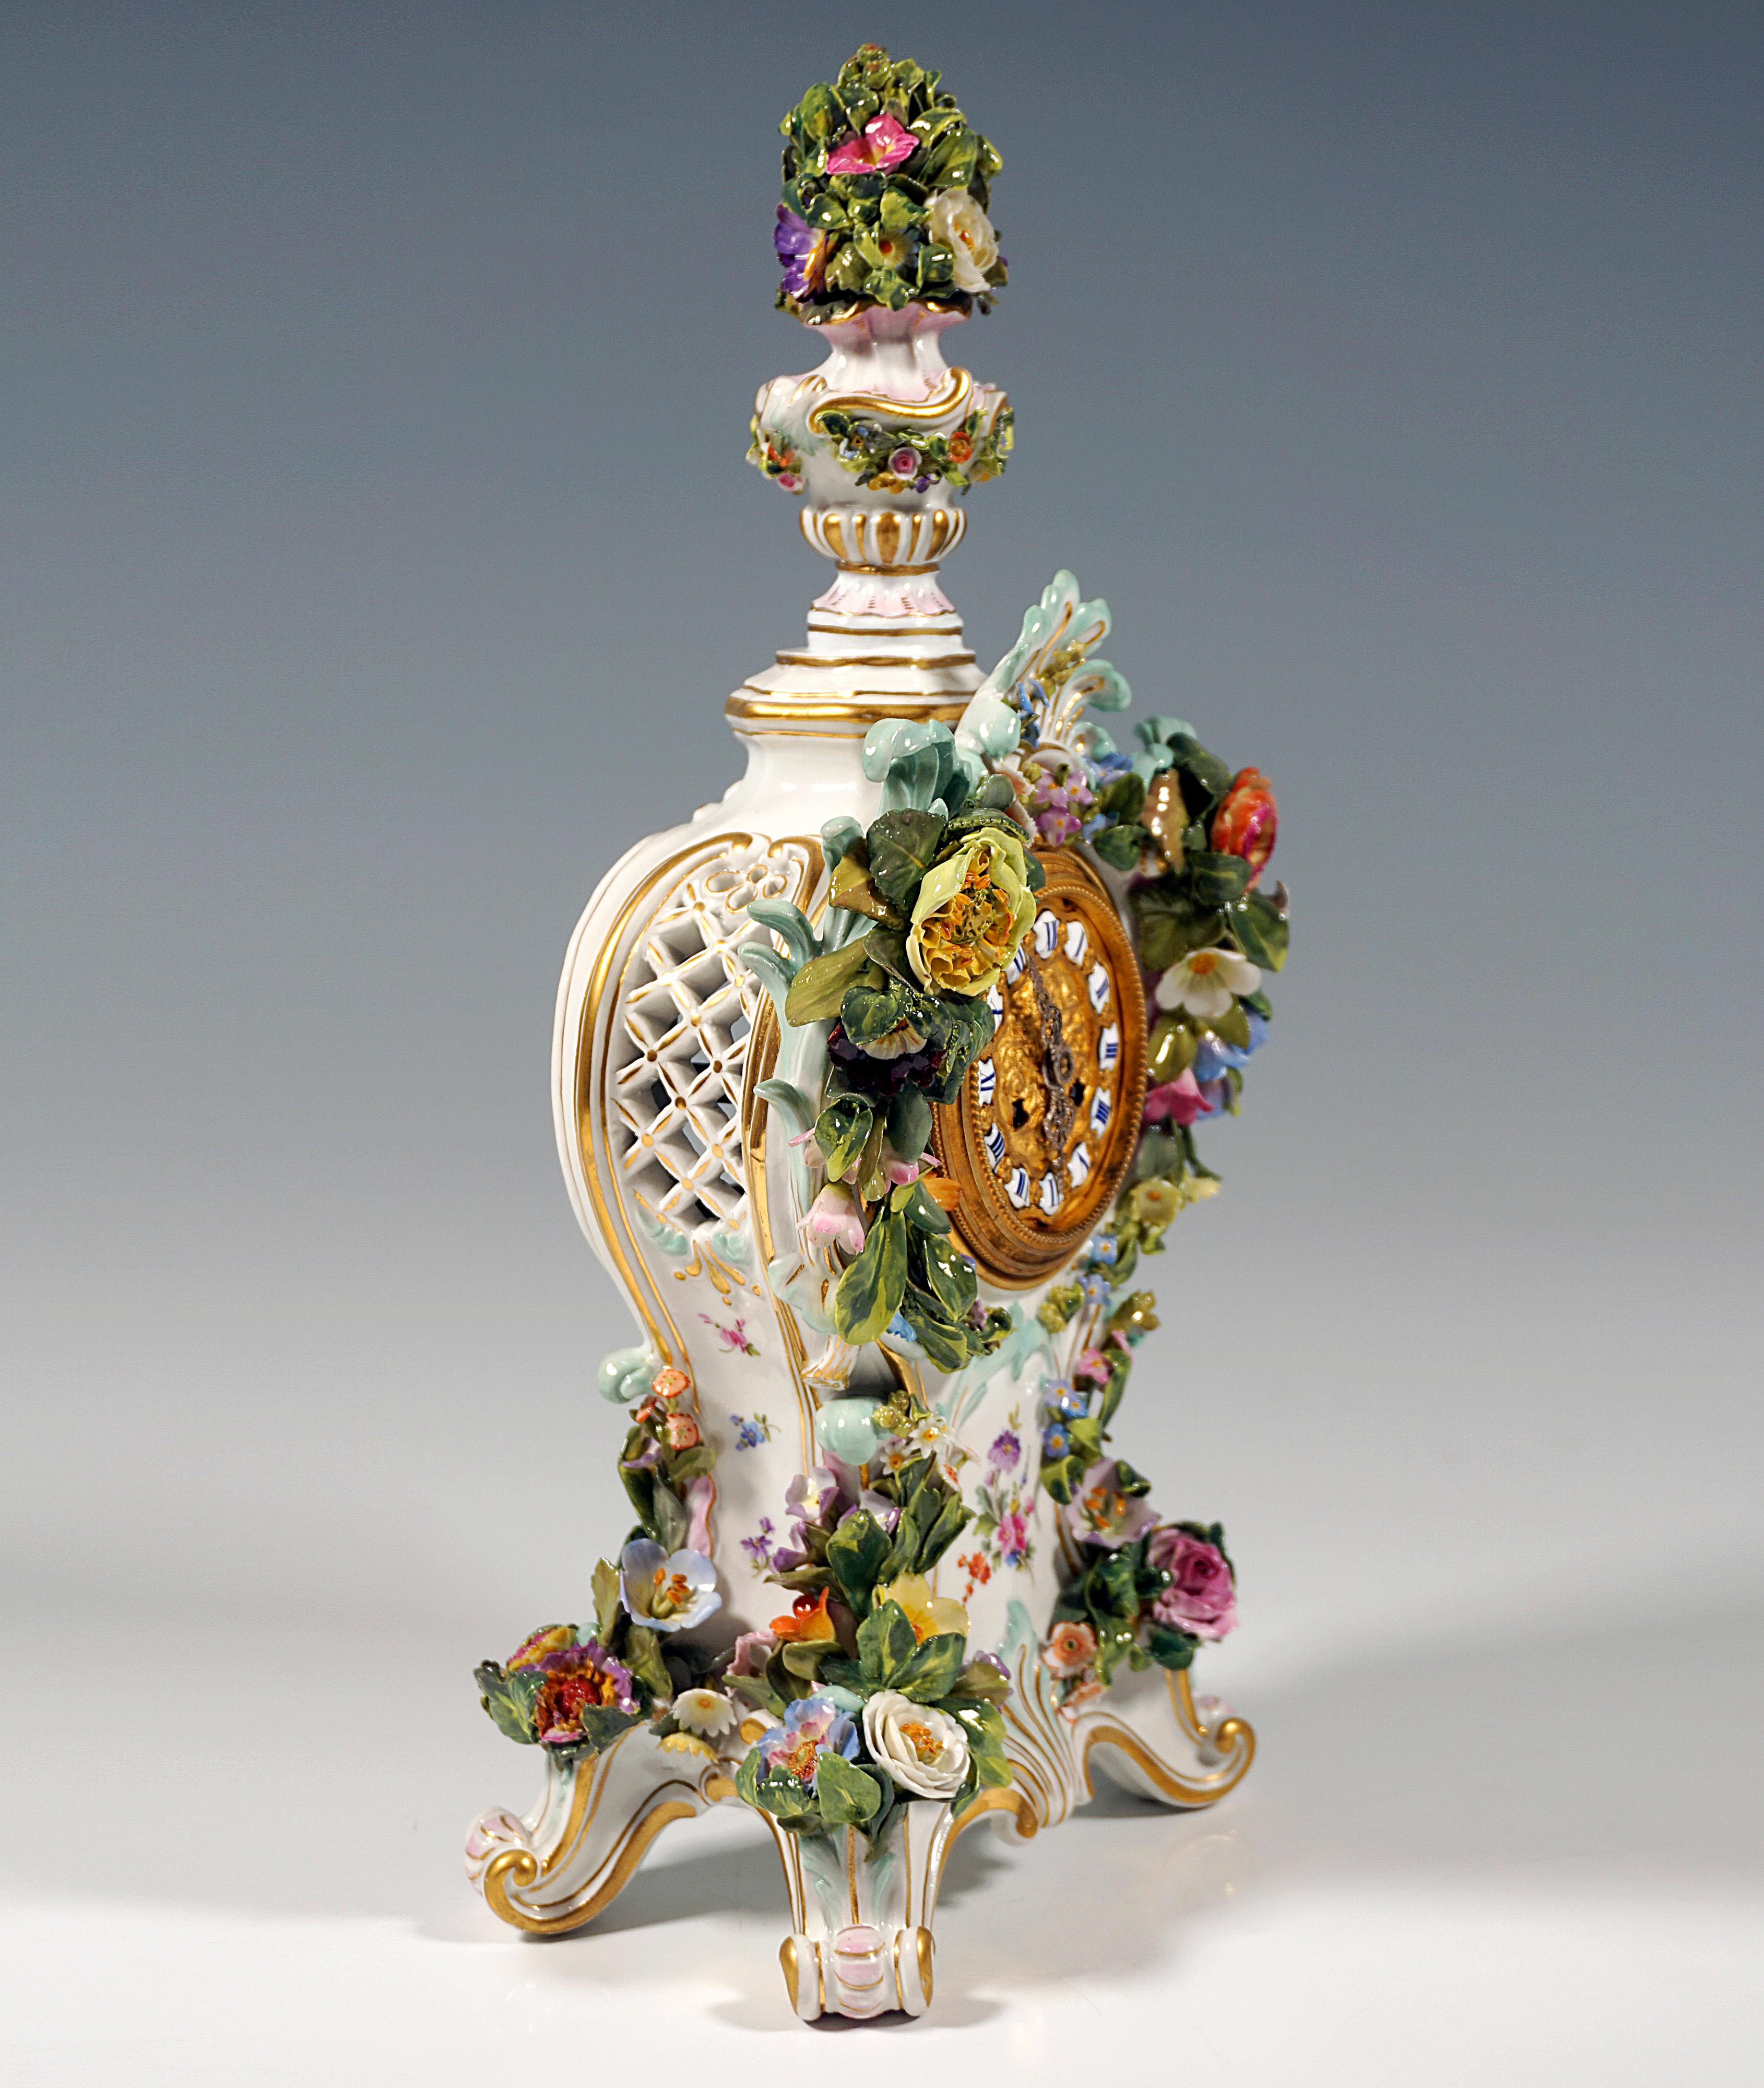 Clock case rising on four gold heightened rocaille feet, richly decorated with delicate, vividly formed flowers, leaves and rocaille surrounding the dial, laterally pierced like a lattice, crowned at the top by a colourfully decorated and gold